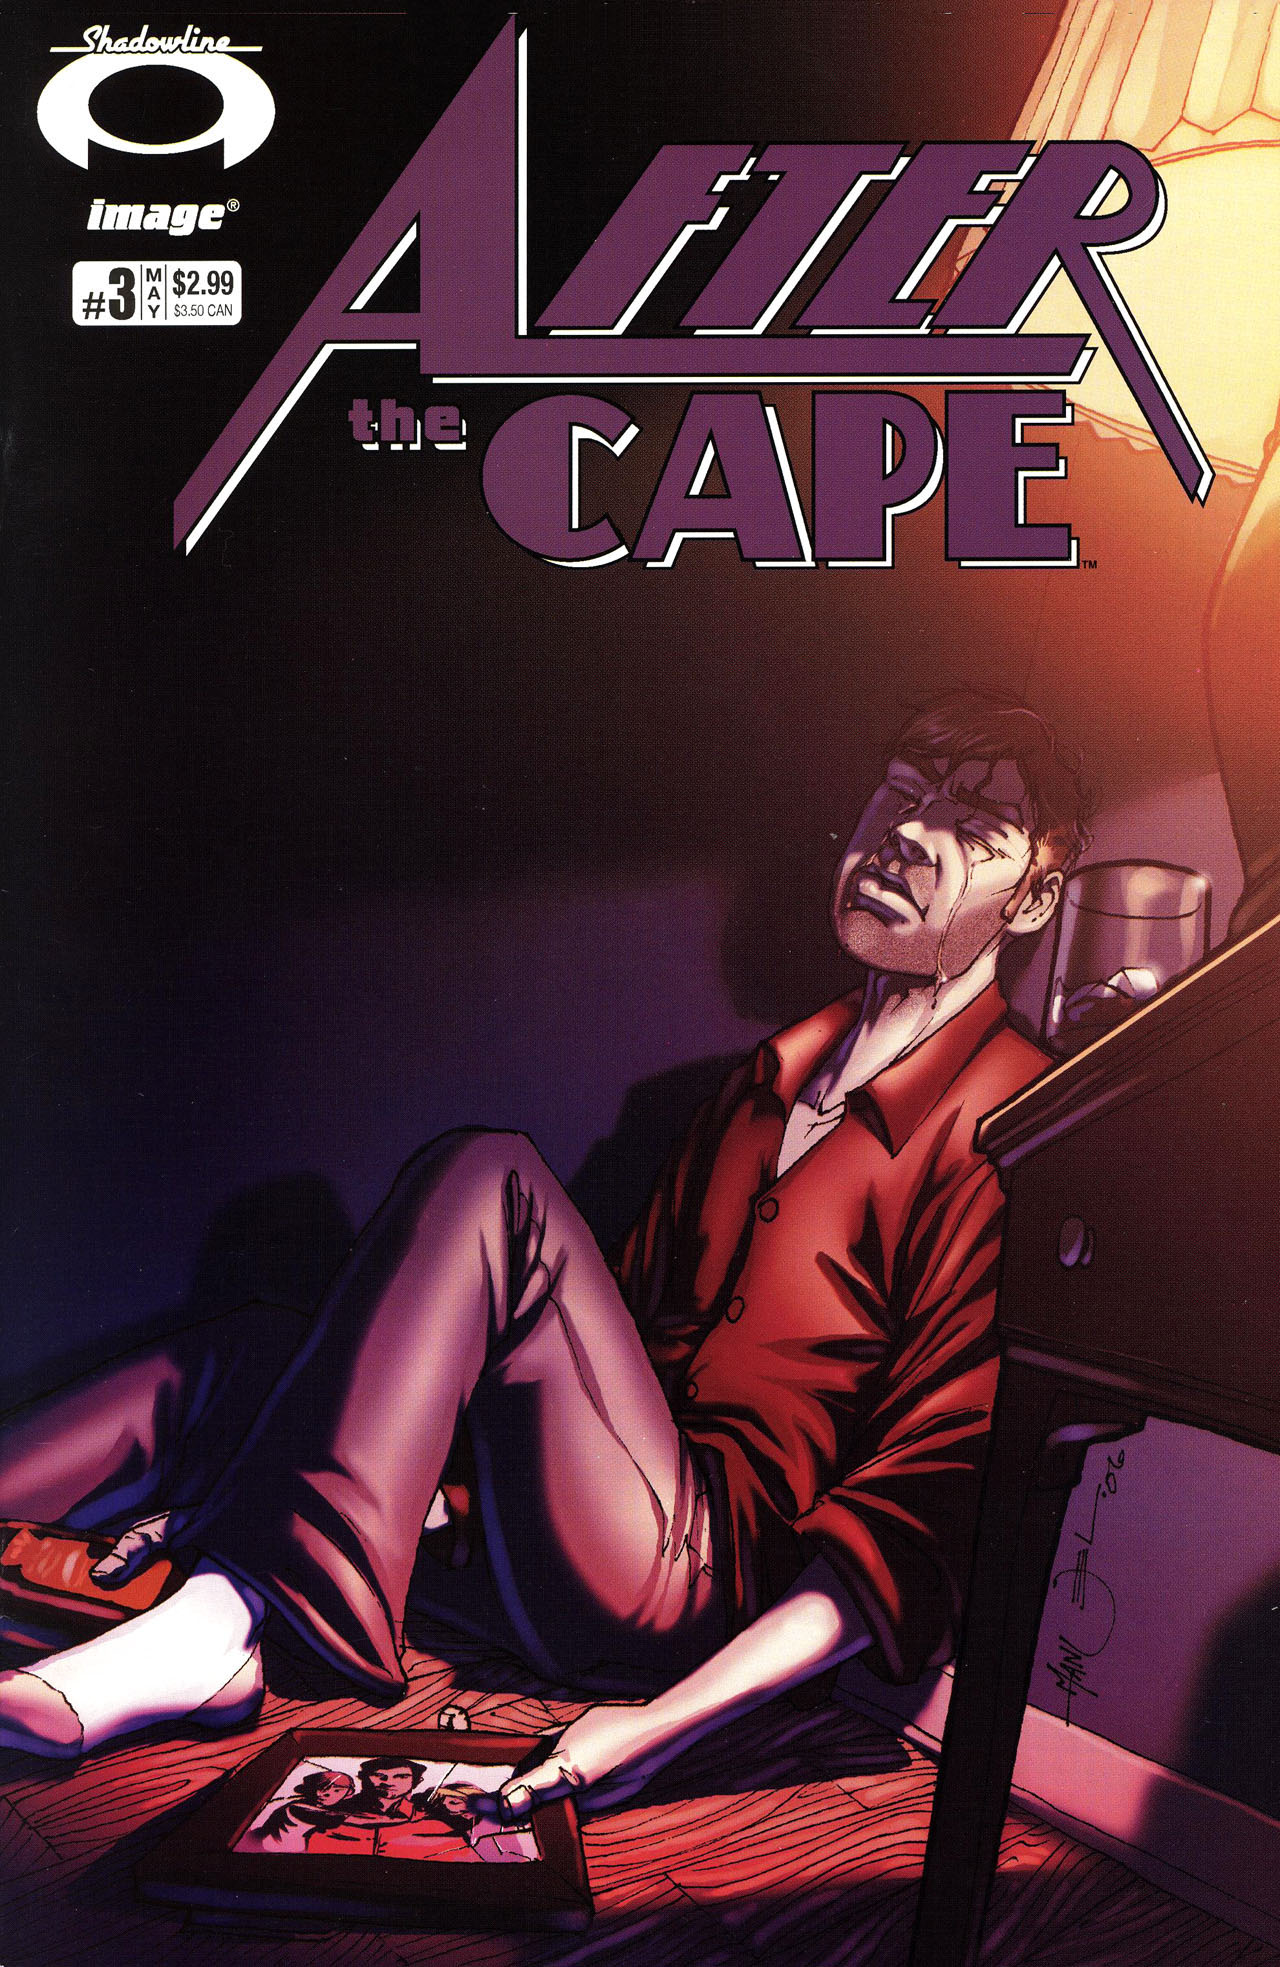 After The Cape - Issue 3: Somewhere Below Rock Bottom